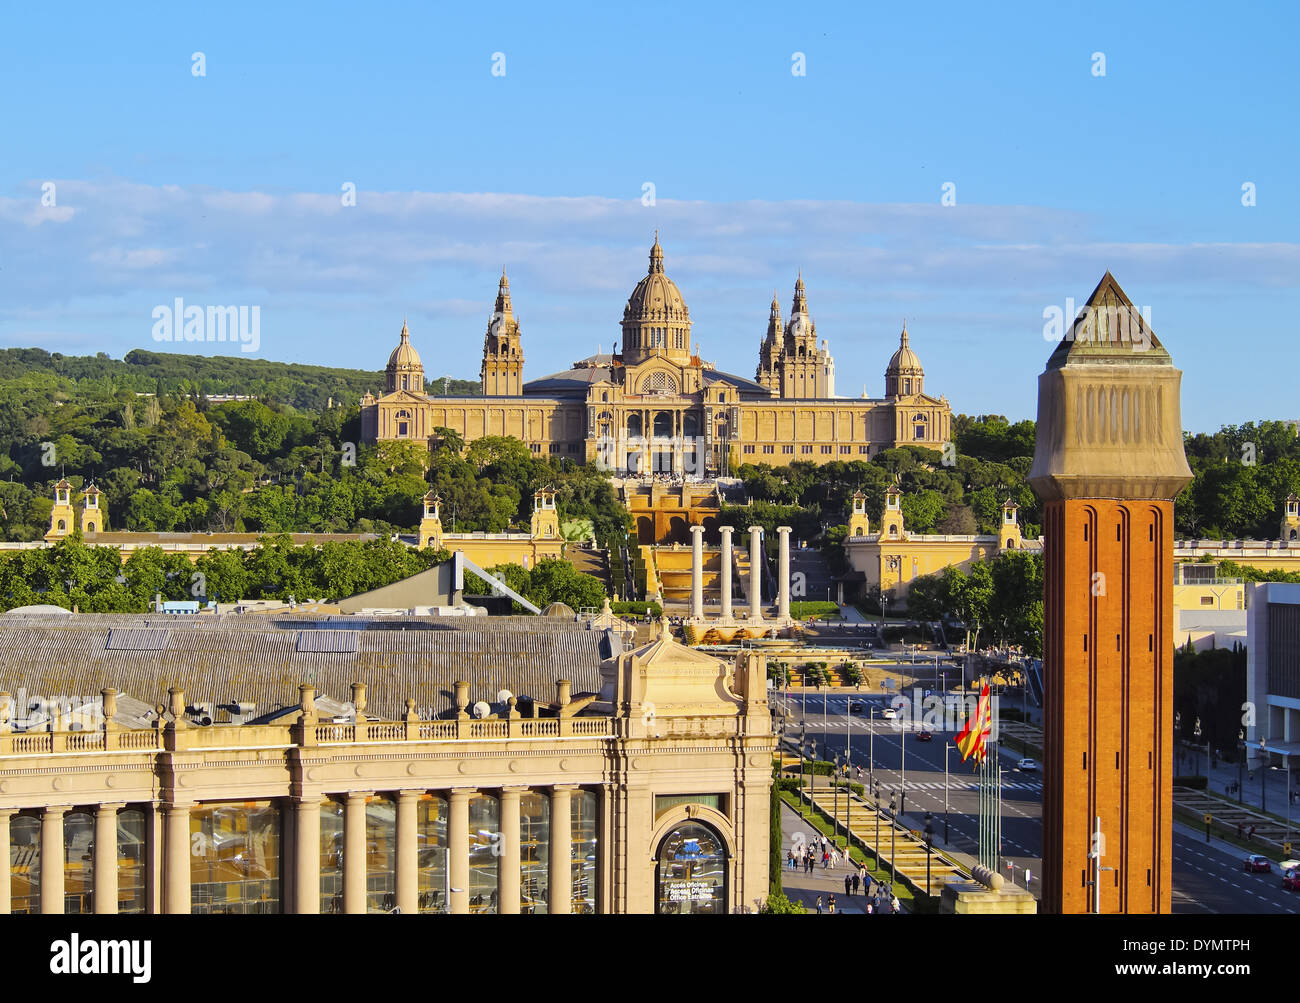 MNAC - National Museum of Art in Barcelona, Catalonia, Spain Stock Photo